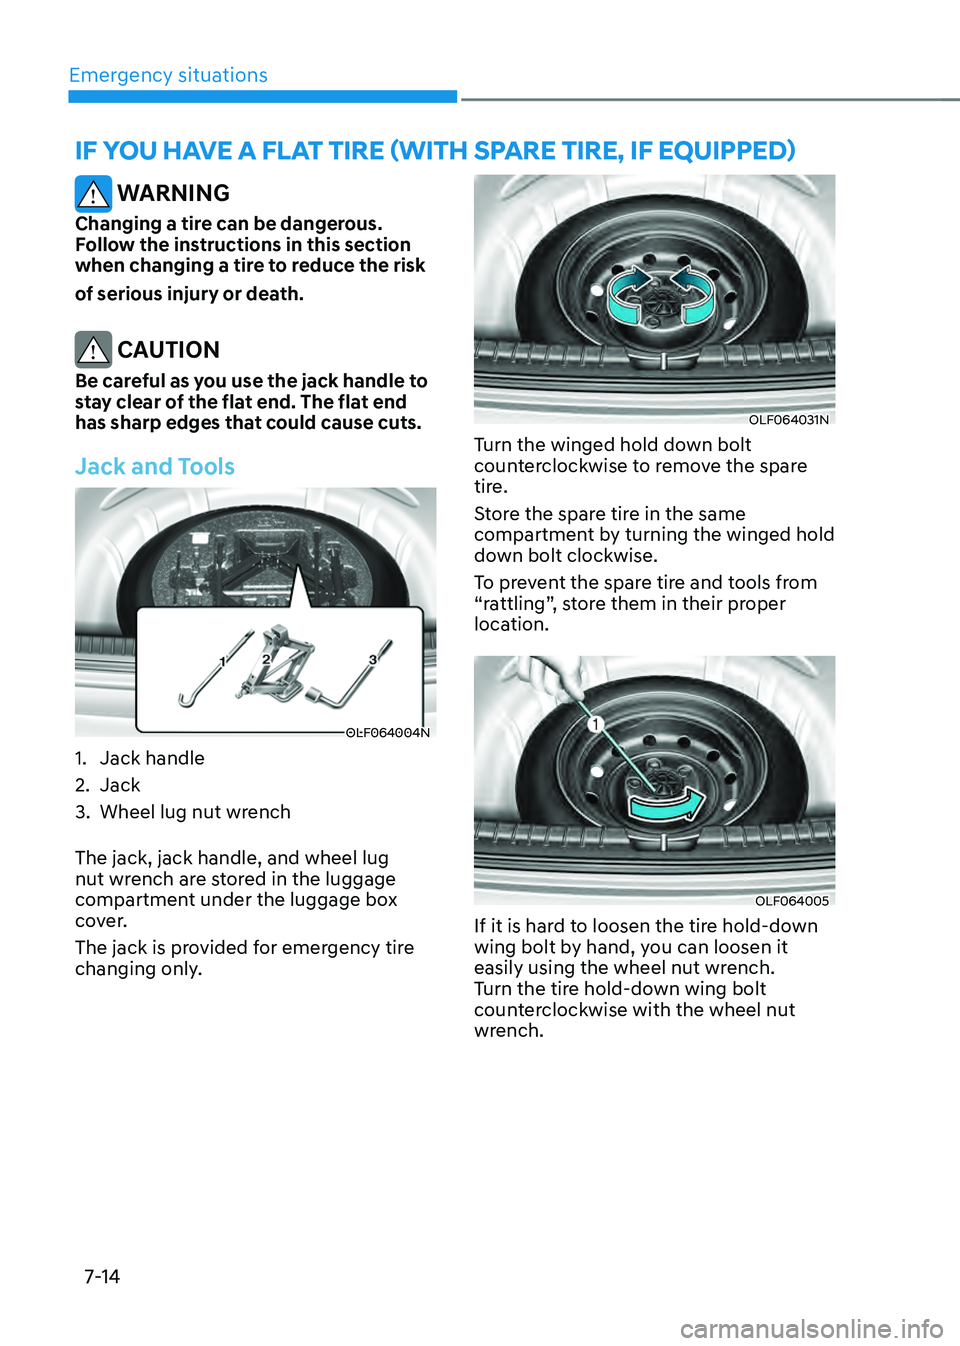 HYUNDAI SONATA HYBRID 2022  Owners Manual Emergency situations
7-14
IF YOU HAVE A FLAT TIRE (WITH SPARE TIRE, IF EQUIPPED)
 WARNING
Changing a tire can be dangerous. 
Follow the instructions in this section 
when changing a tire to reduce the